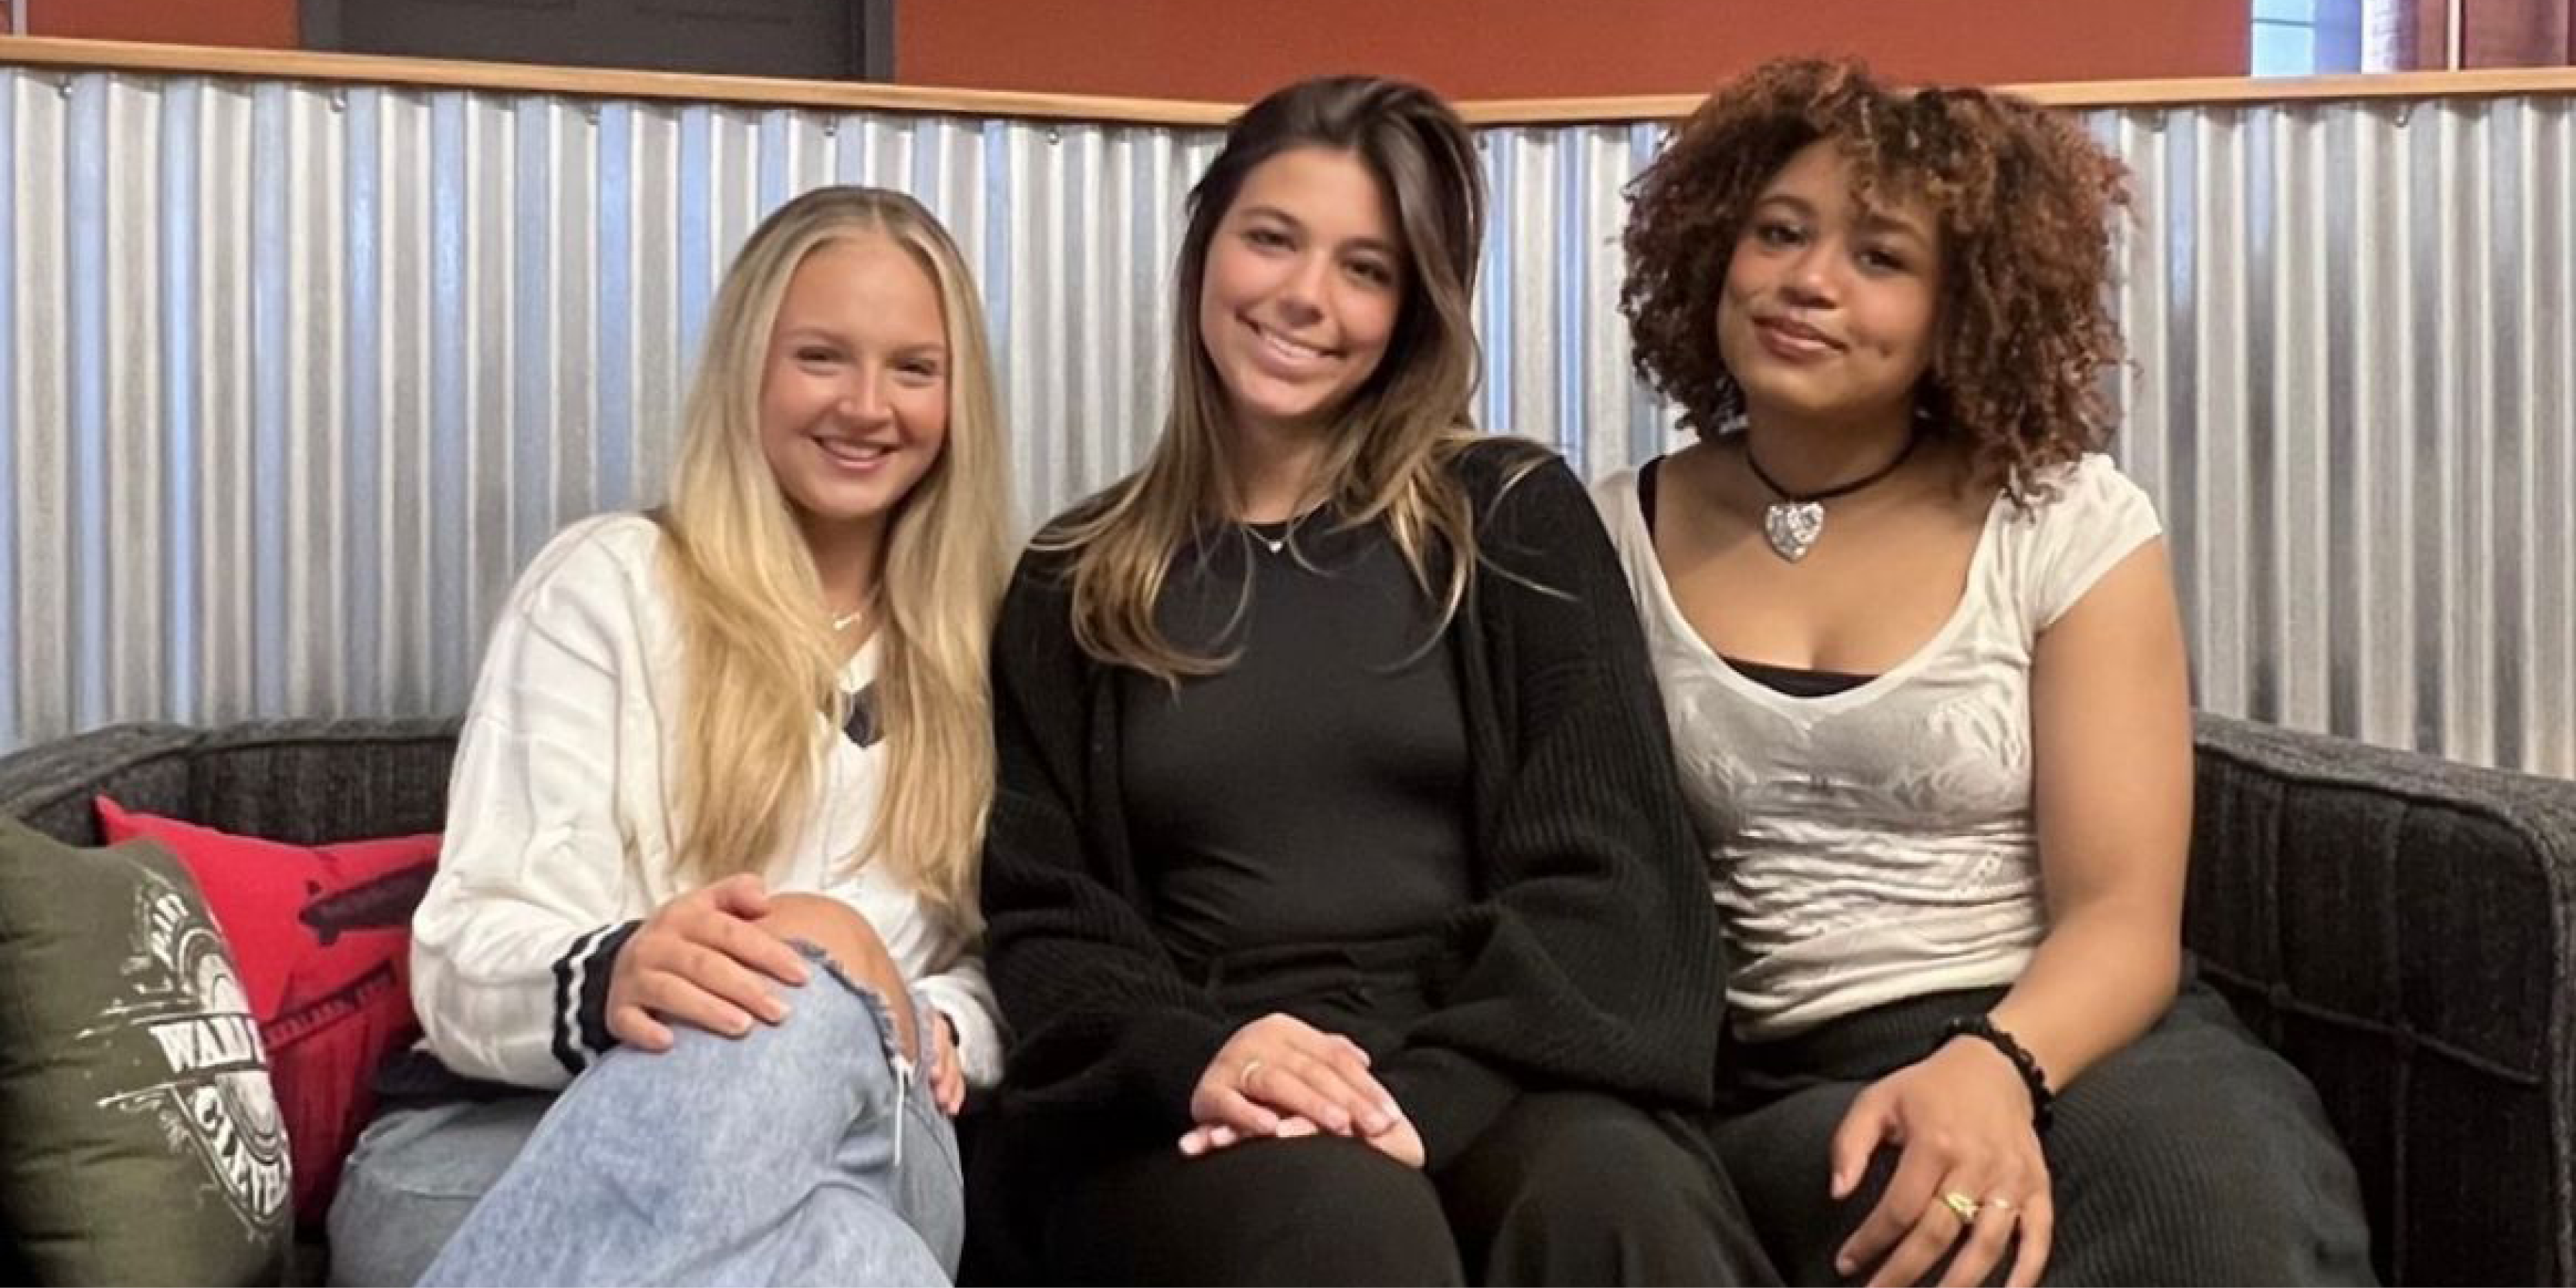 Maddie, Kayley and Mya sitting on a couch